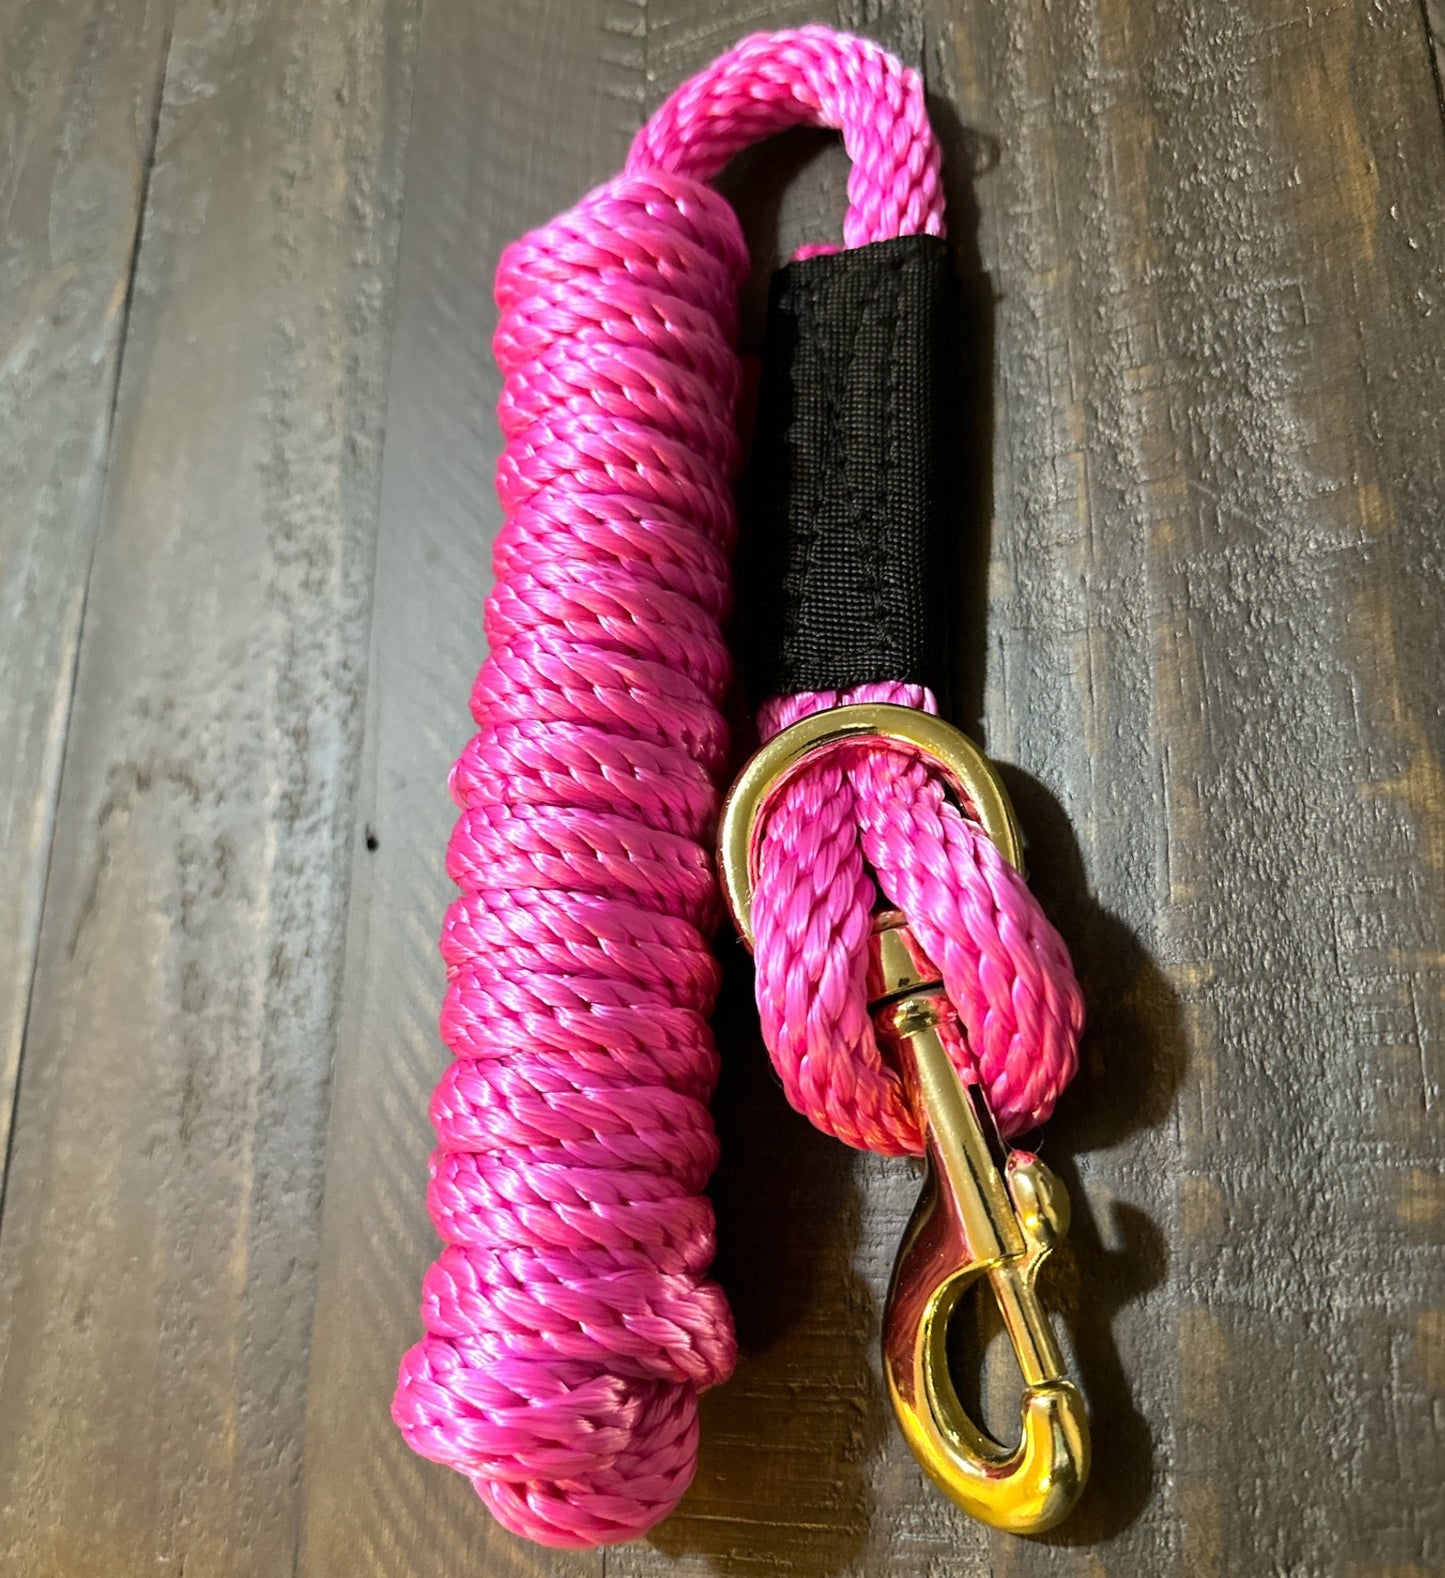 8' Derby Lead Rope